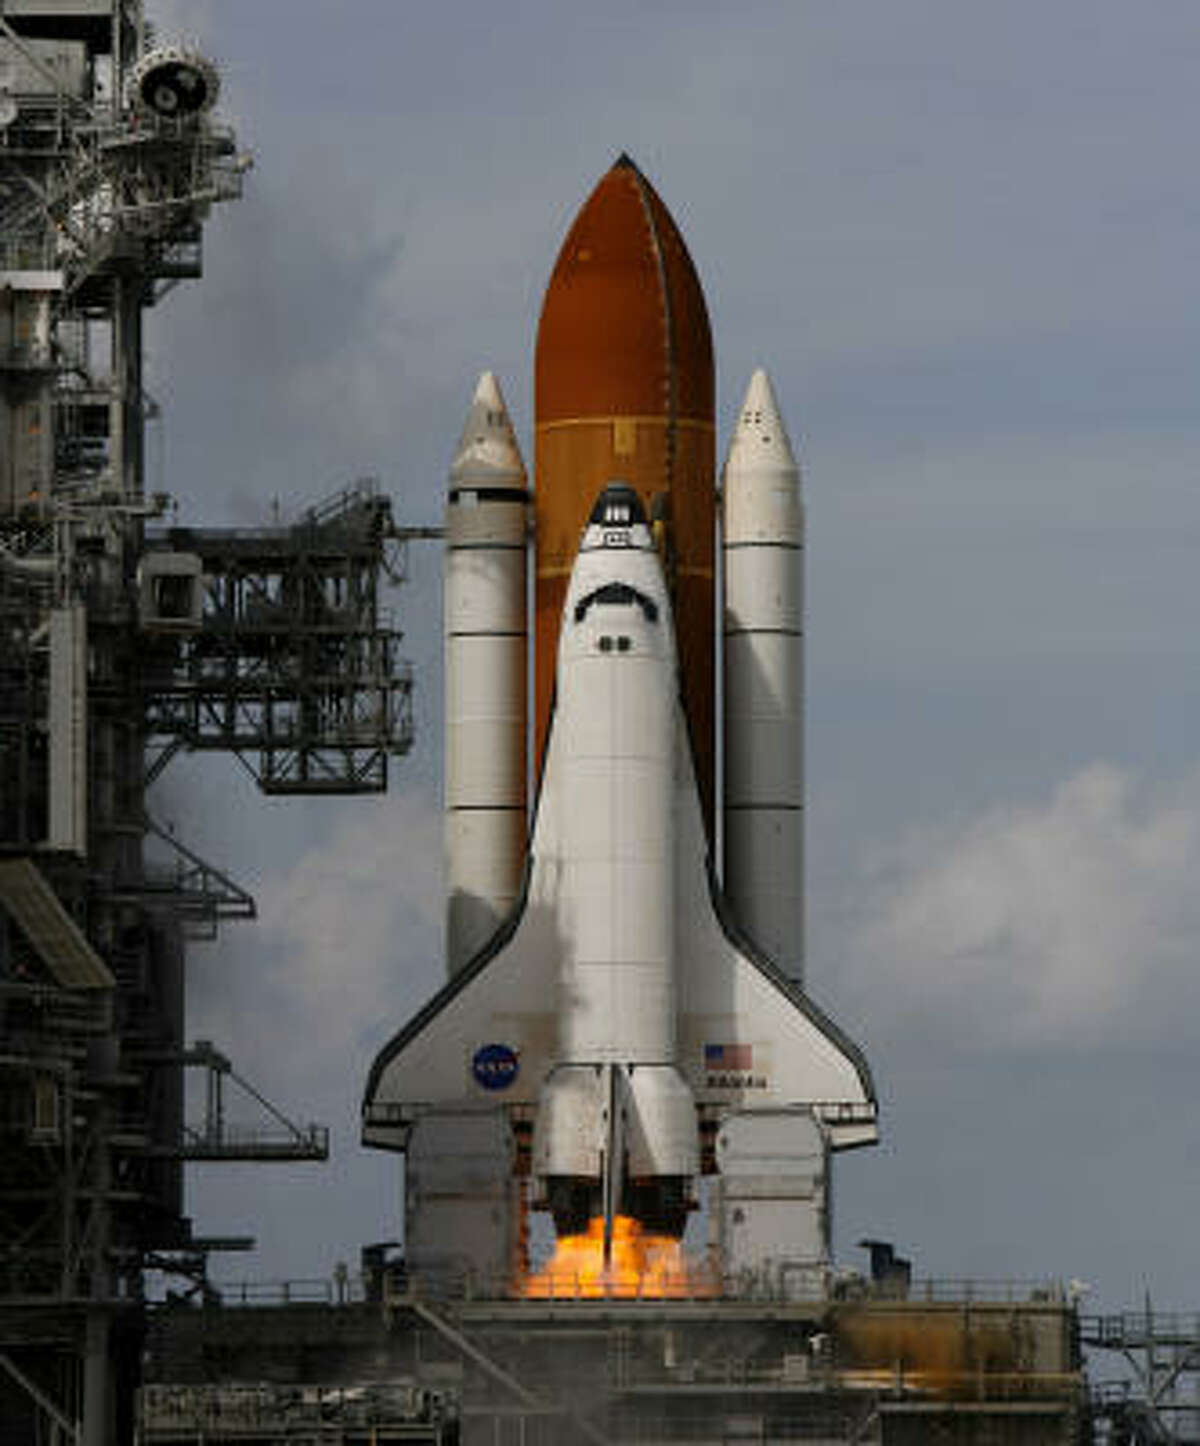 The Space Shuttle Atlantis launches from the Kennedy Space Center for mission STS-122.